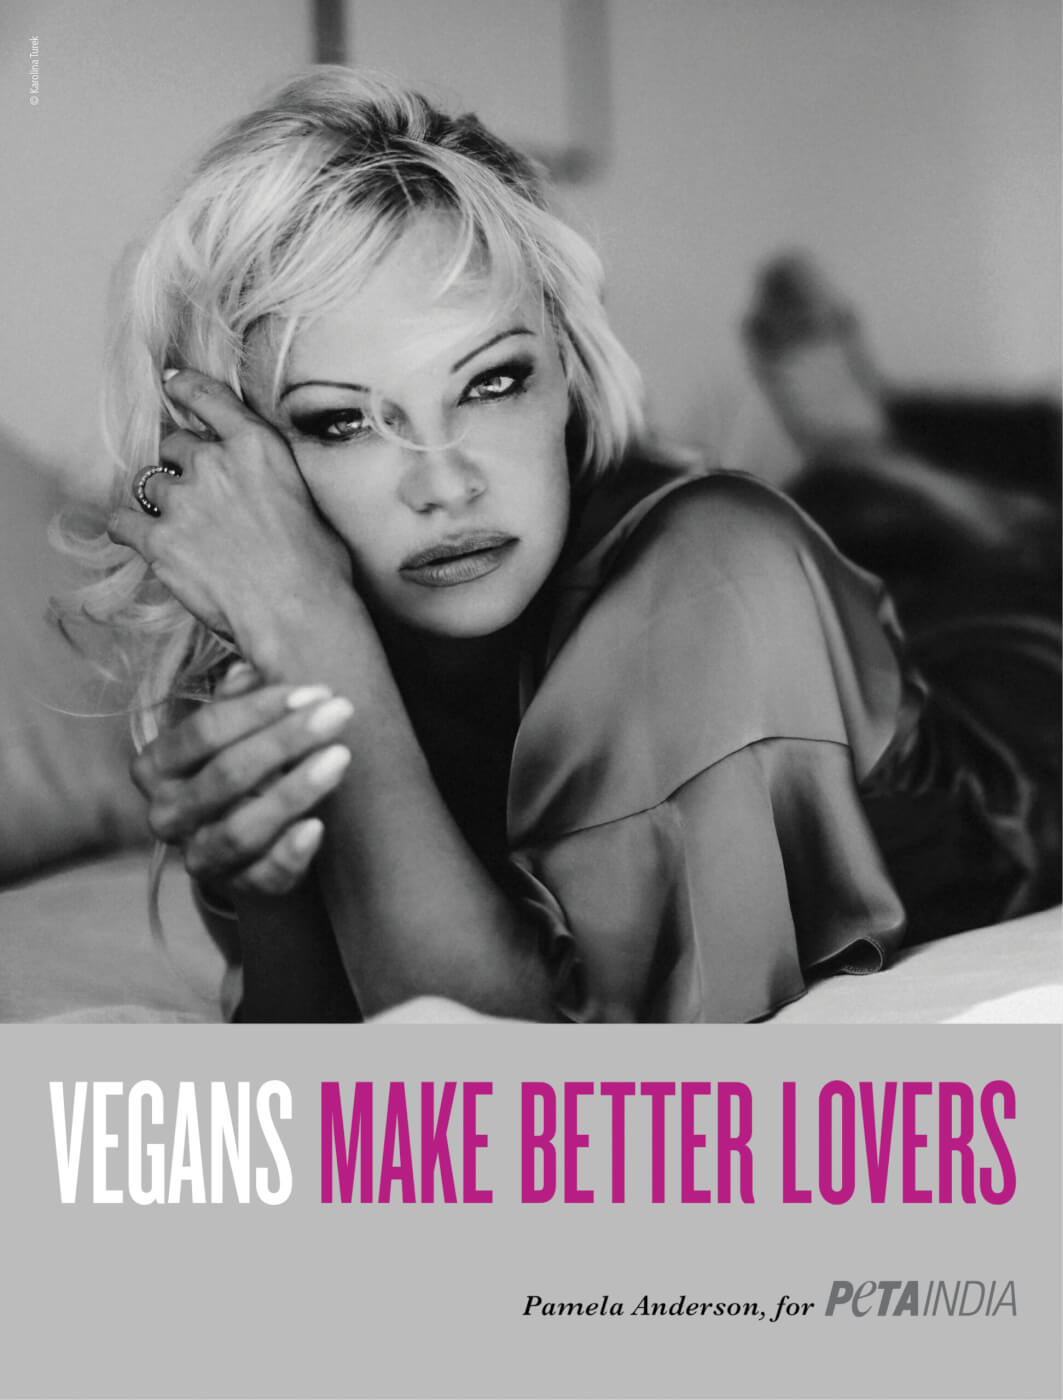 Hollywood’s Pamela Anderson Heats Up Valentine’s Day With New ‘Vegans Make Better Lovers’ Campaign